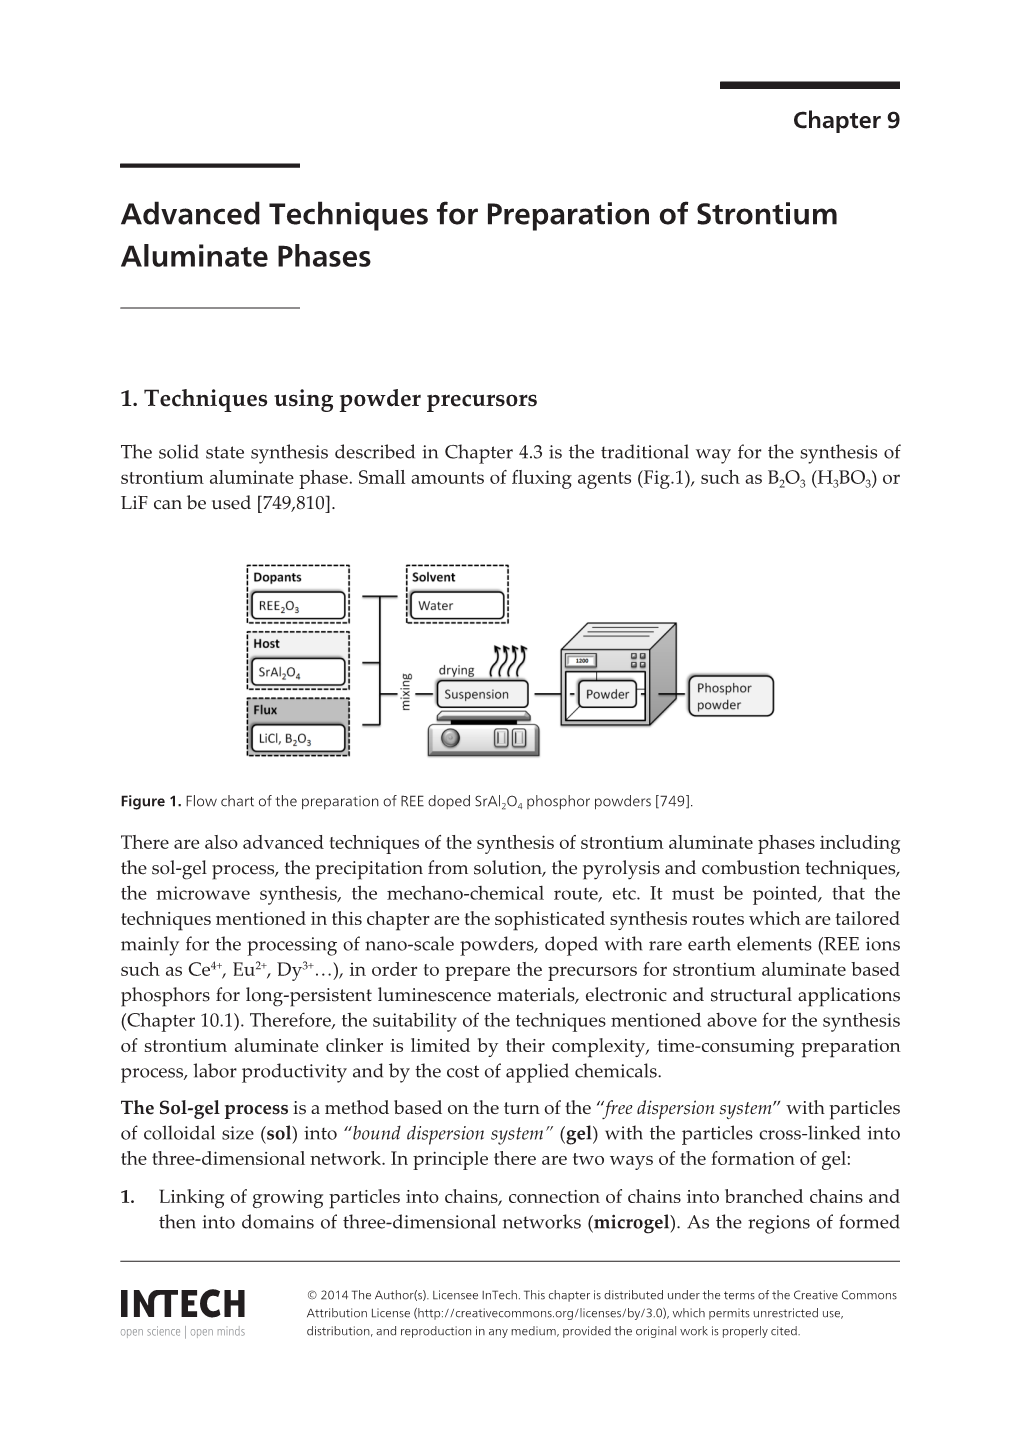 Advanced Techniques for Preparation of Strontium Aluminate Phases